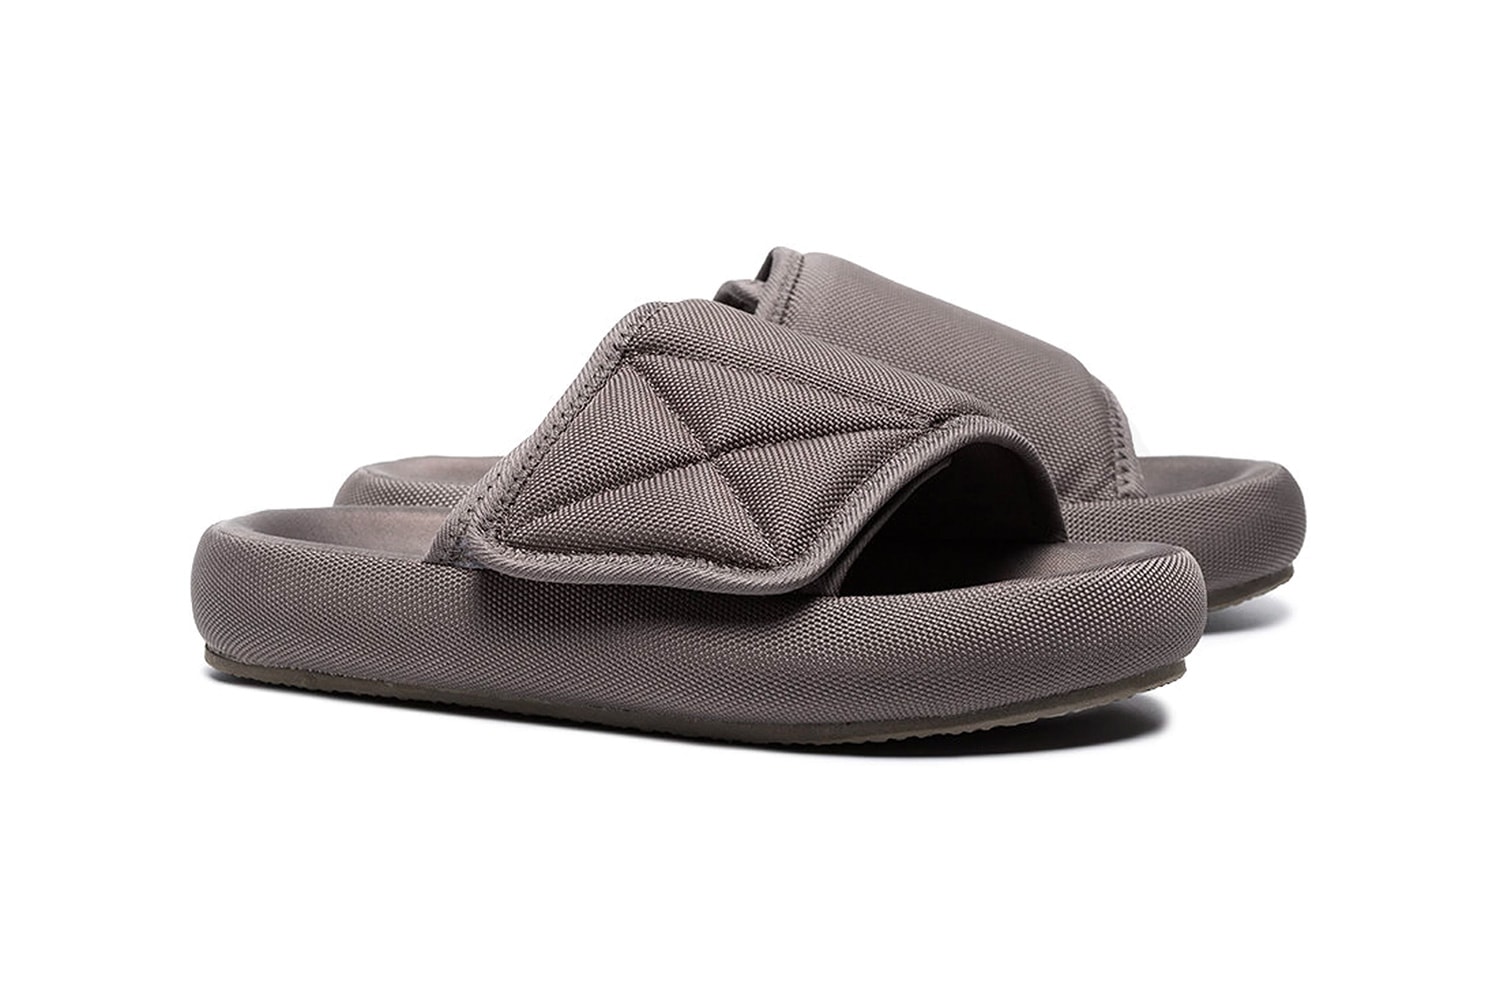 YEEZY Slides season 6 slippers purchase release buy available now price